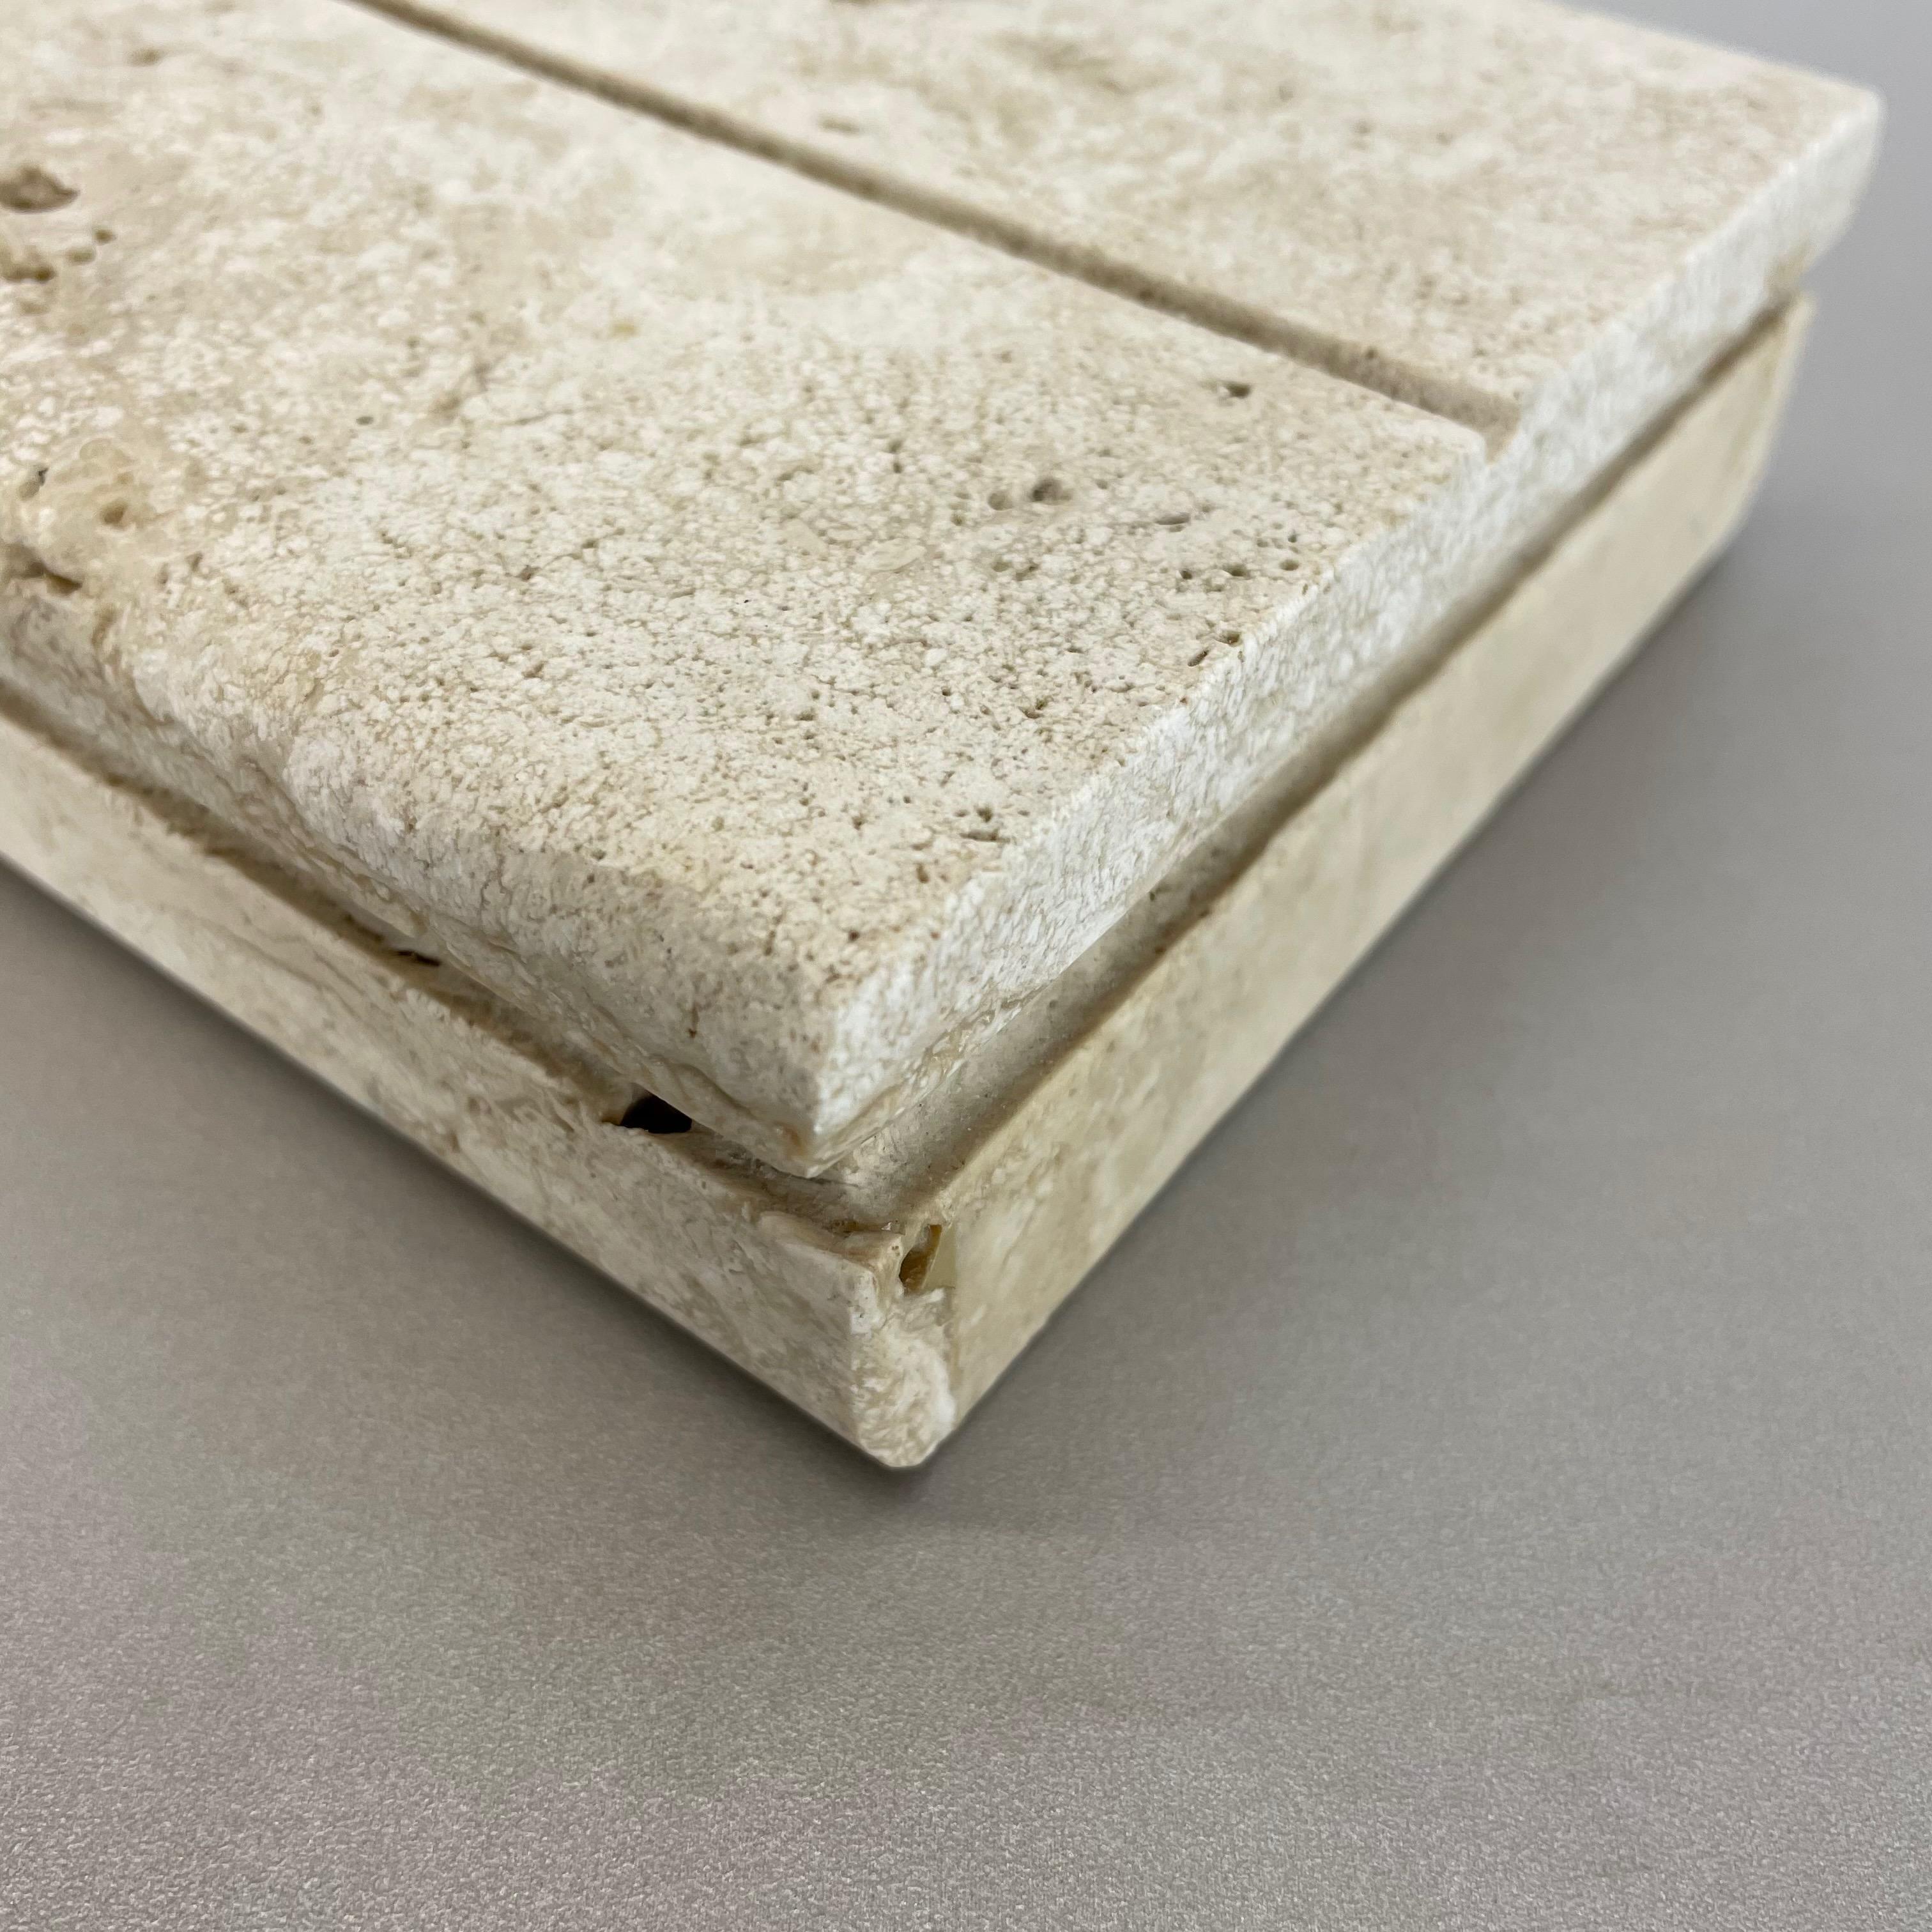 20th Century Modernist Travertine Marble Box Vide Poche by Fratelli Mannelli, Italy, 1970s For Sale